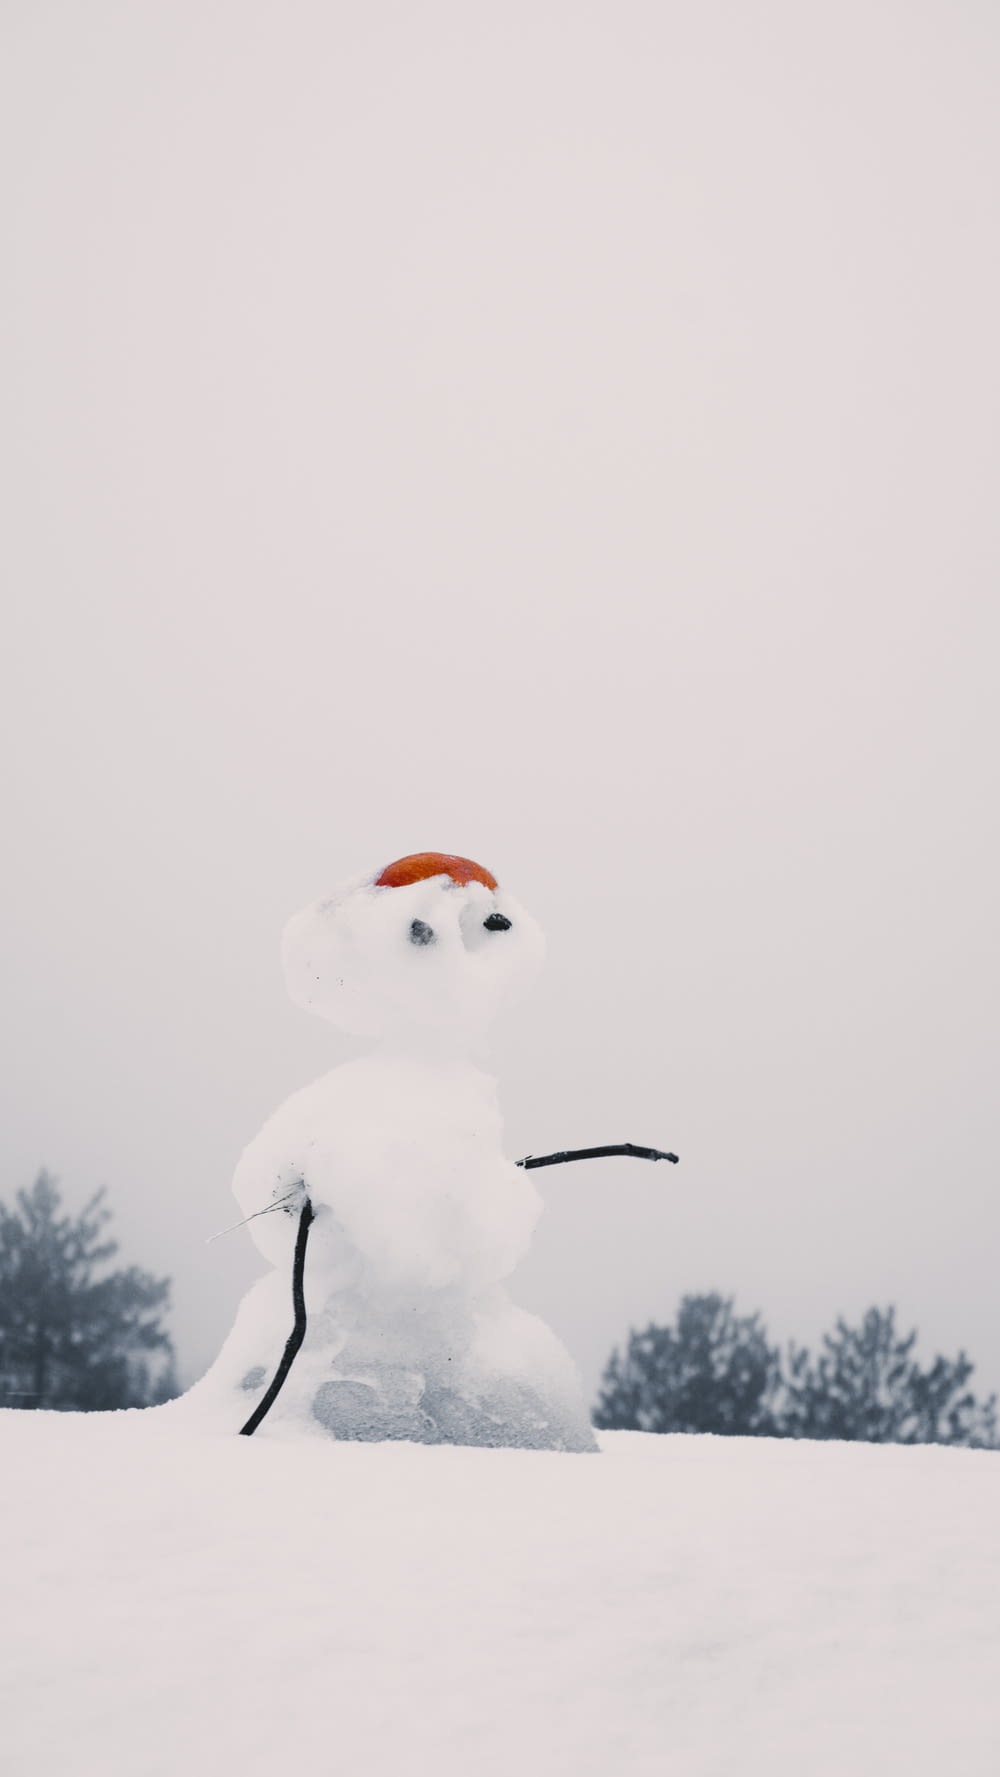 a snowman with a red hat is in the snow